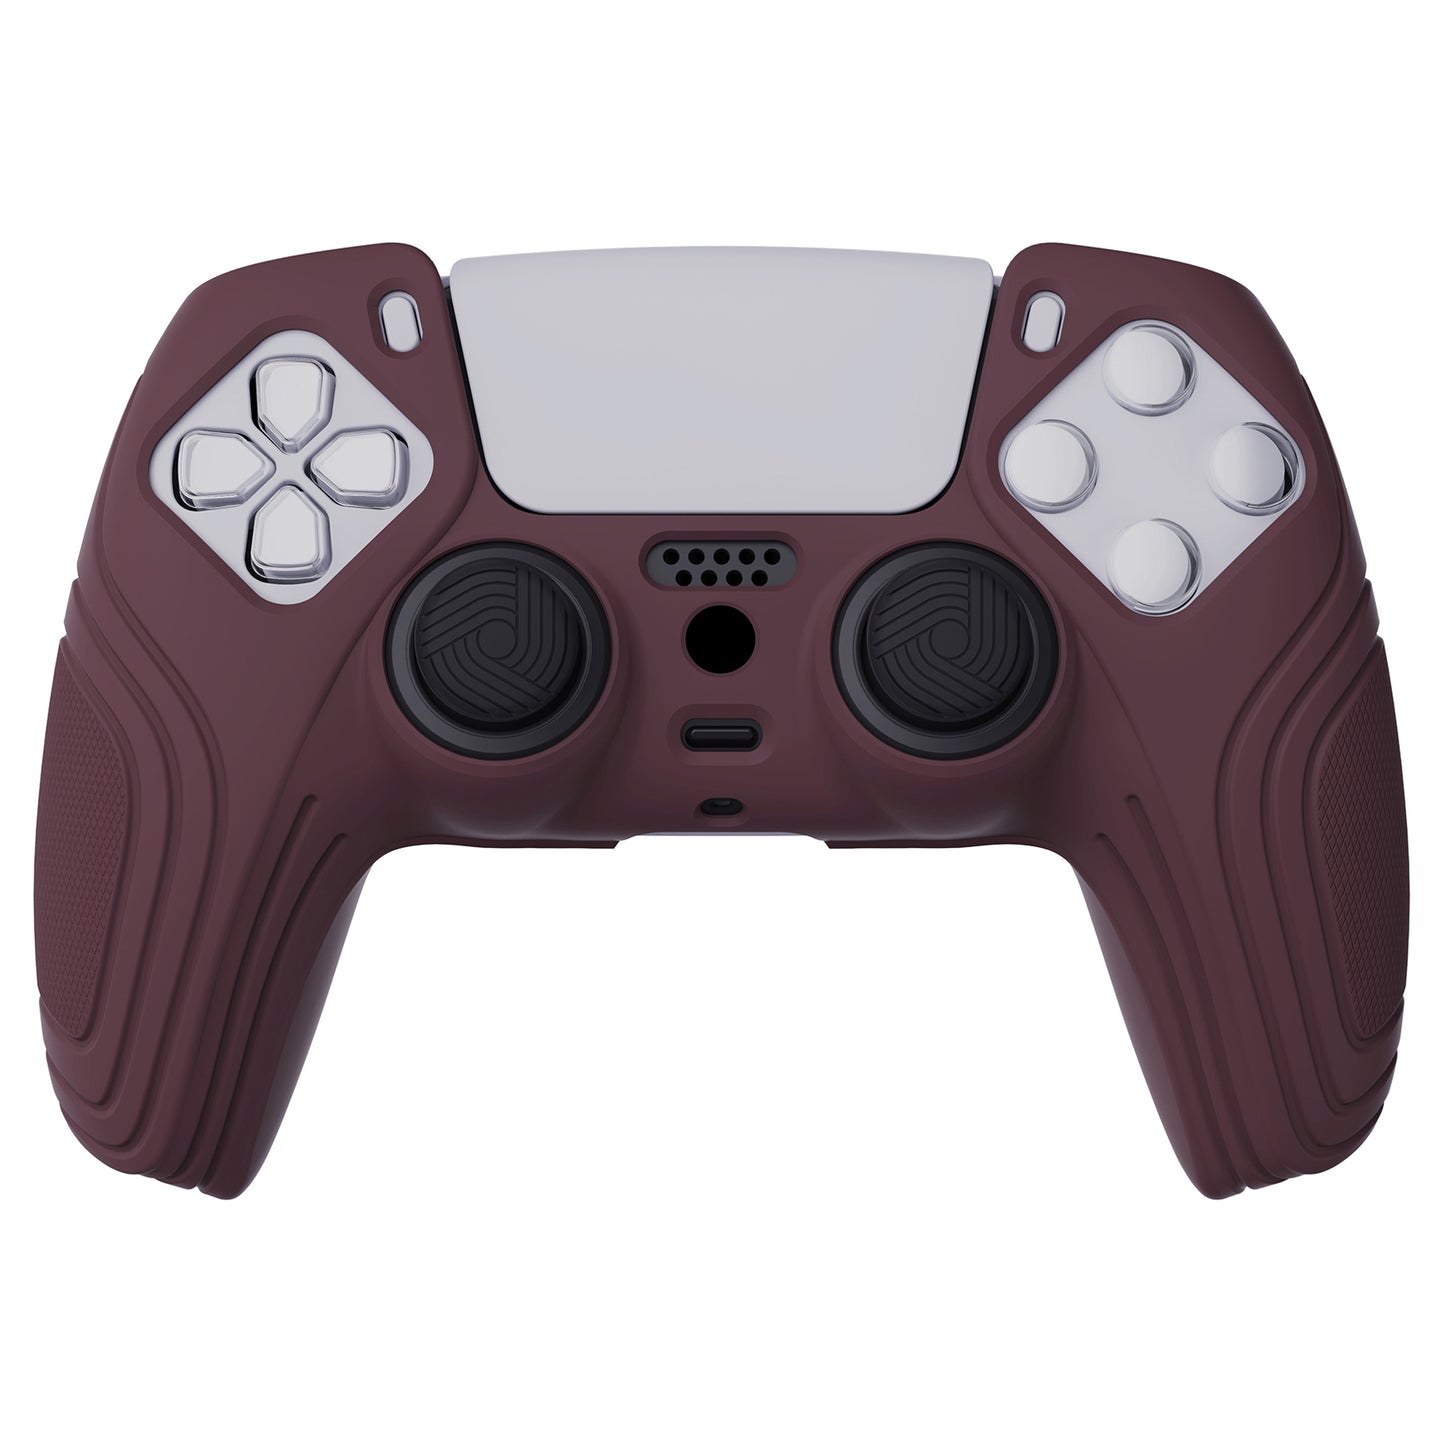 PlayVital Samurai Edition Anti-Slip Silicone Cover Skin with Thumb Grip Caps for PS5 Wireless Controller - Wine Red - BWPF011 PlayVital